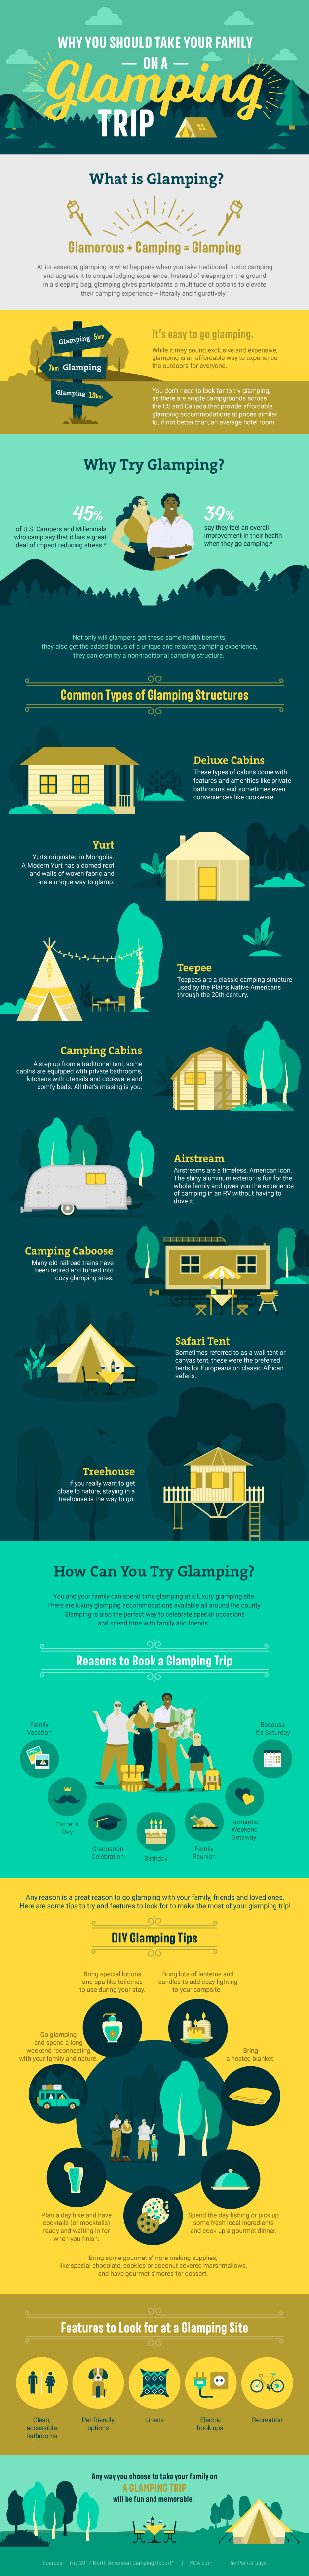 Top 5 Glamping Destinations in the United States